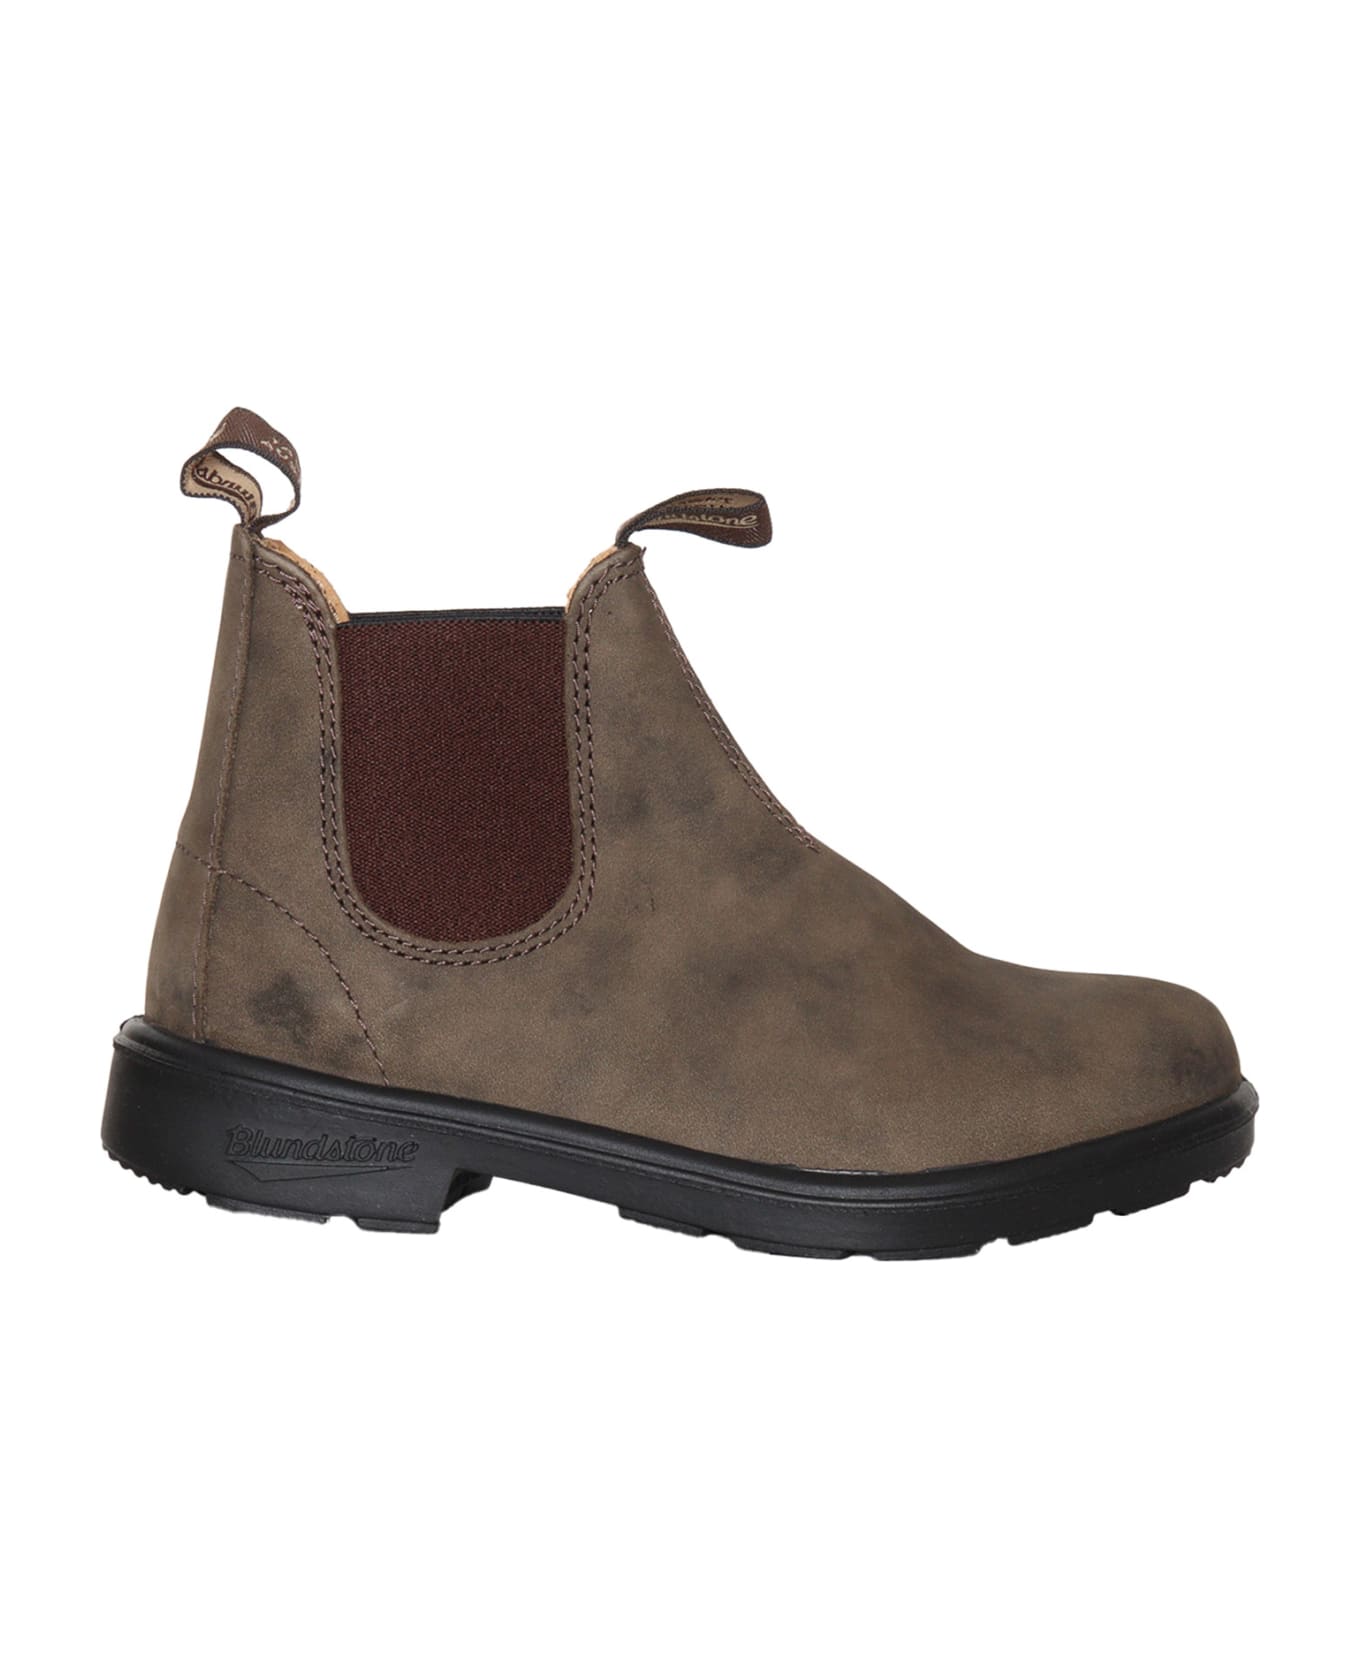 Blundstone Rustic Ankle Boots - BROWN シューズ